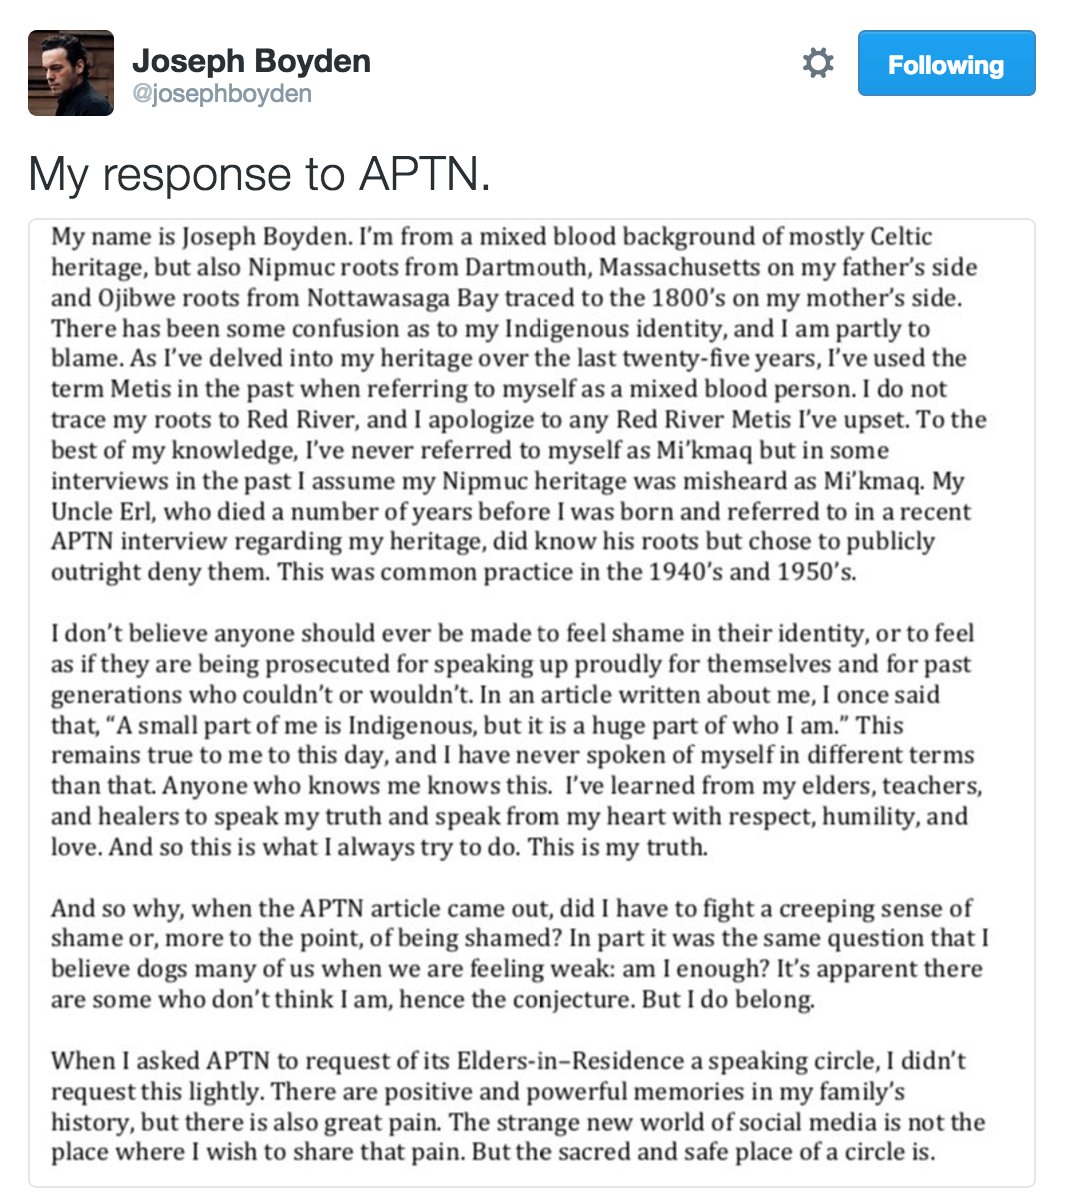 Still adding to my thread on Boyden. On Christmas Eve, he posted a response to APTN: https://t.co/4aVu9Gx7v4 https://t.co/EjH0VYTsBN